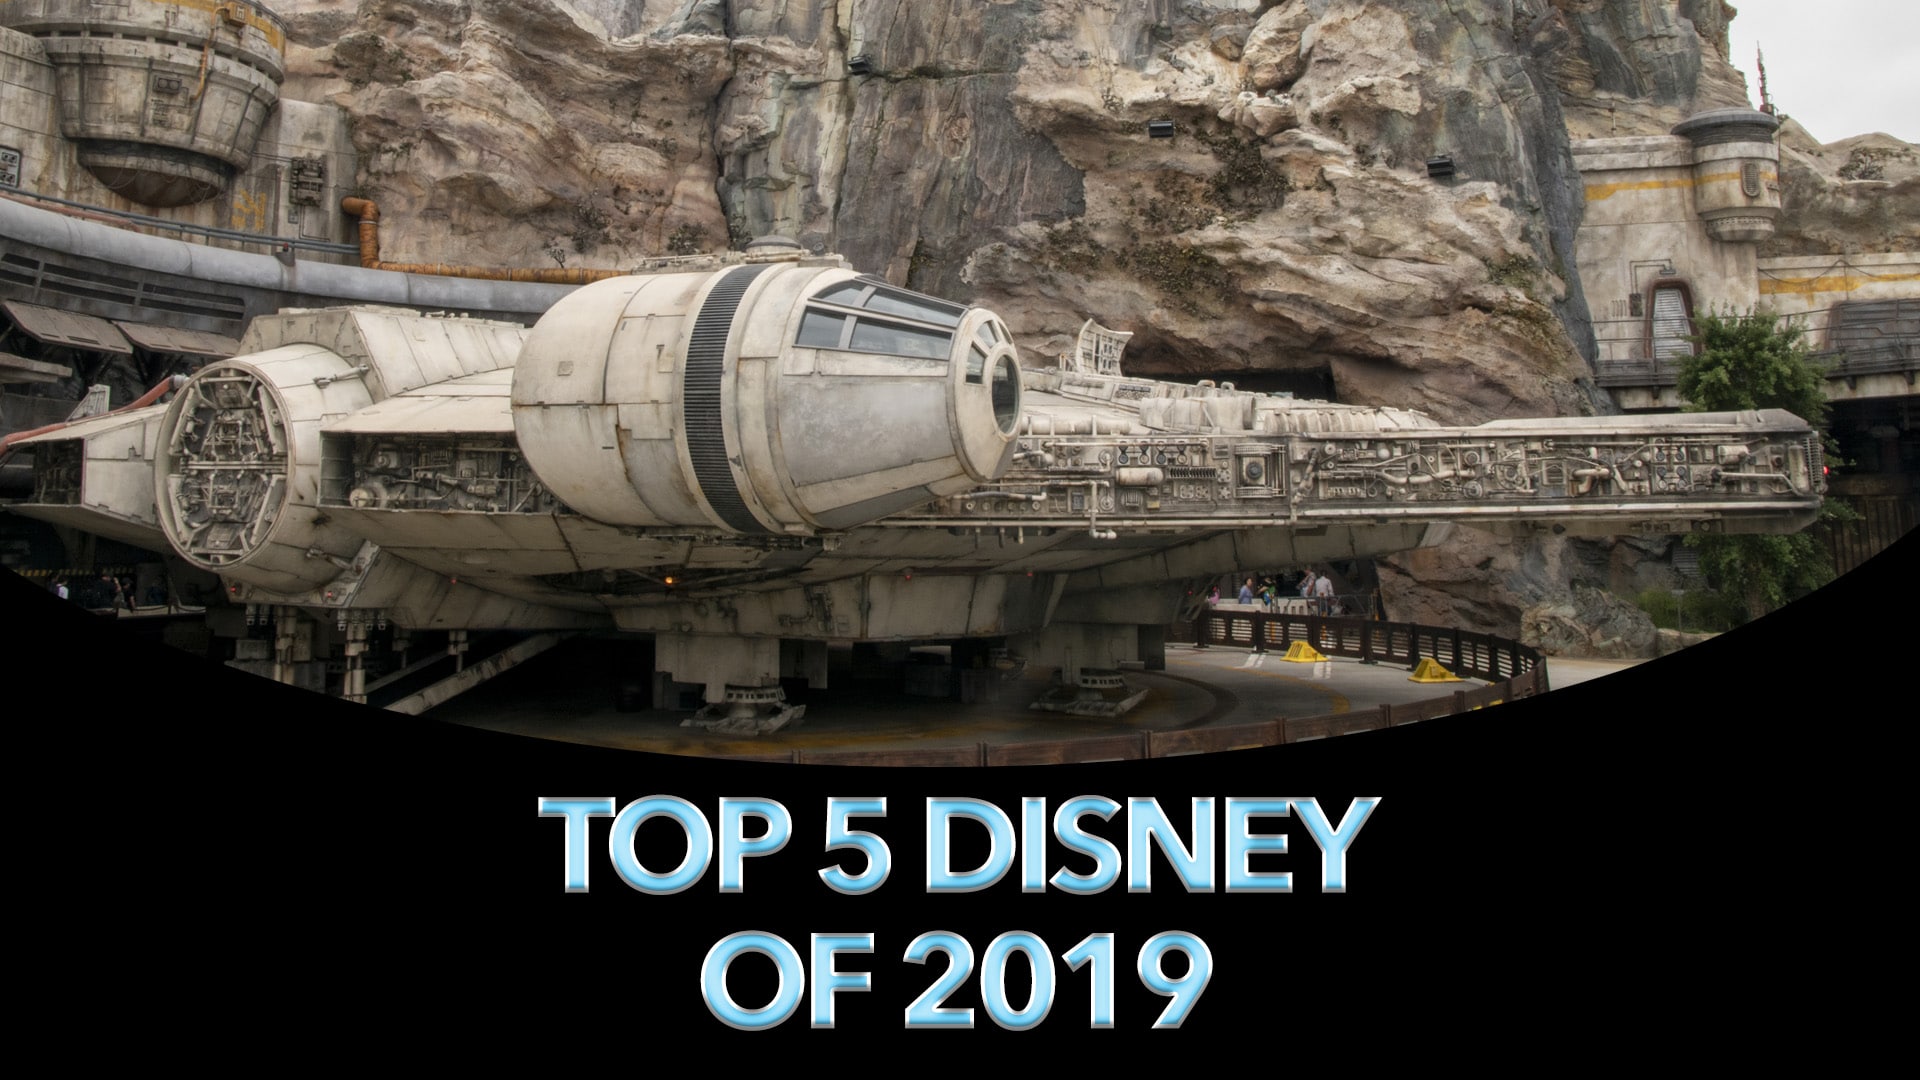 Top 5 Disney Stories of 2019 – #2: Star Wars Galaxy’s Edge (and Review of Rise of the Resistance)